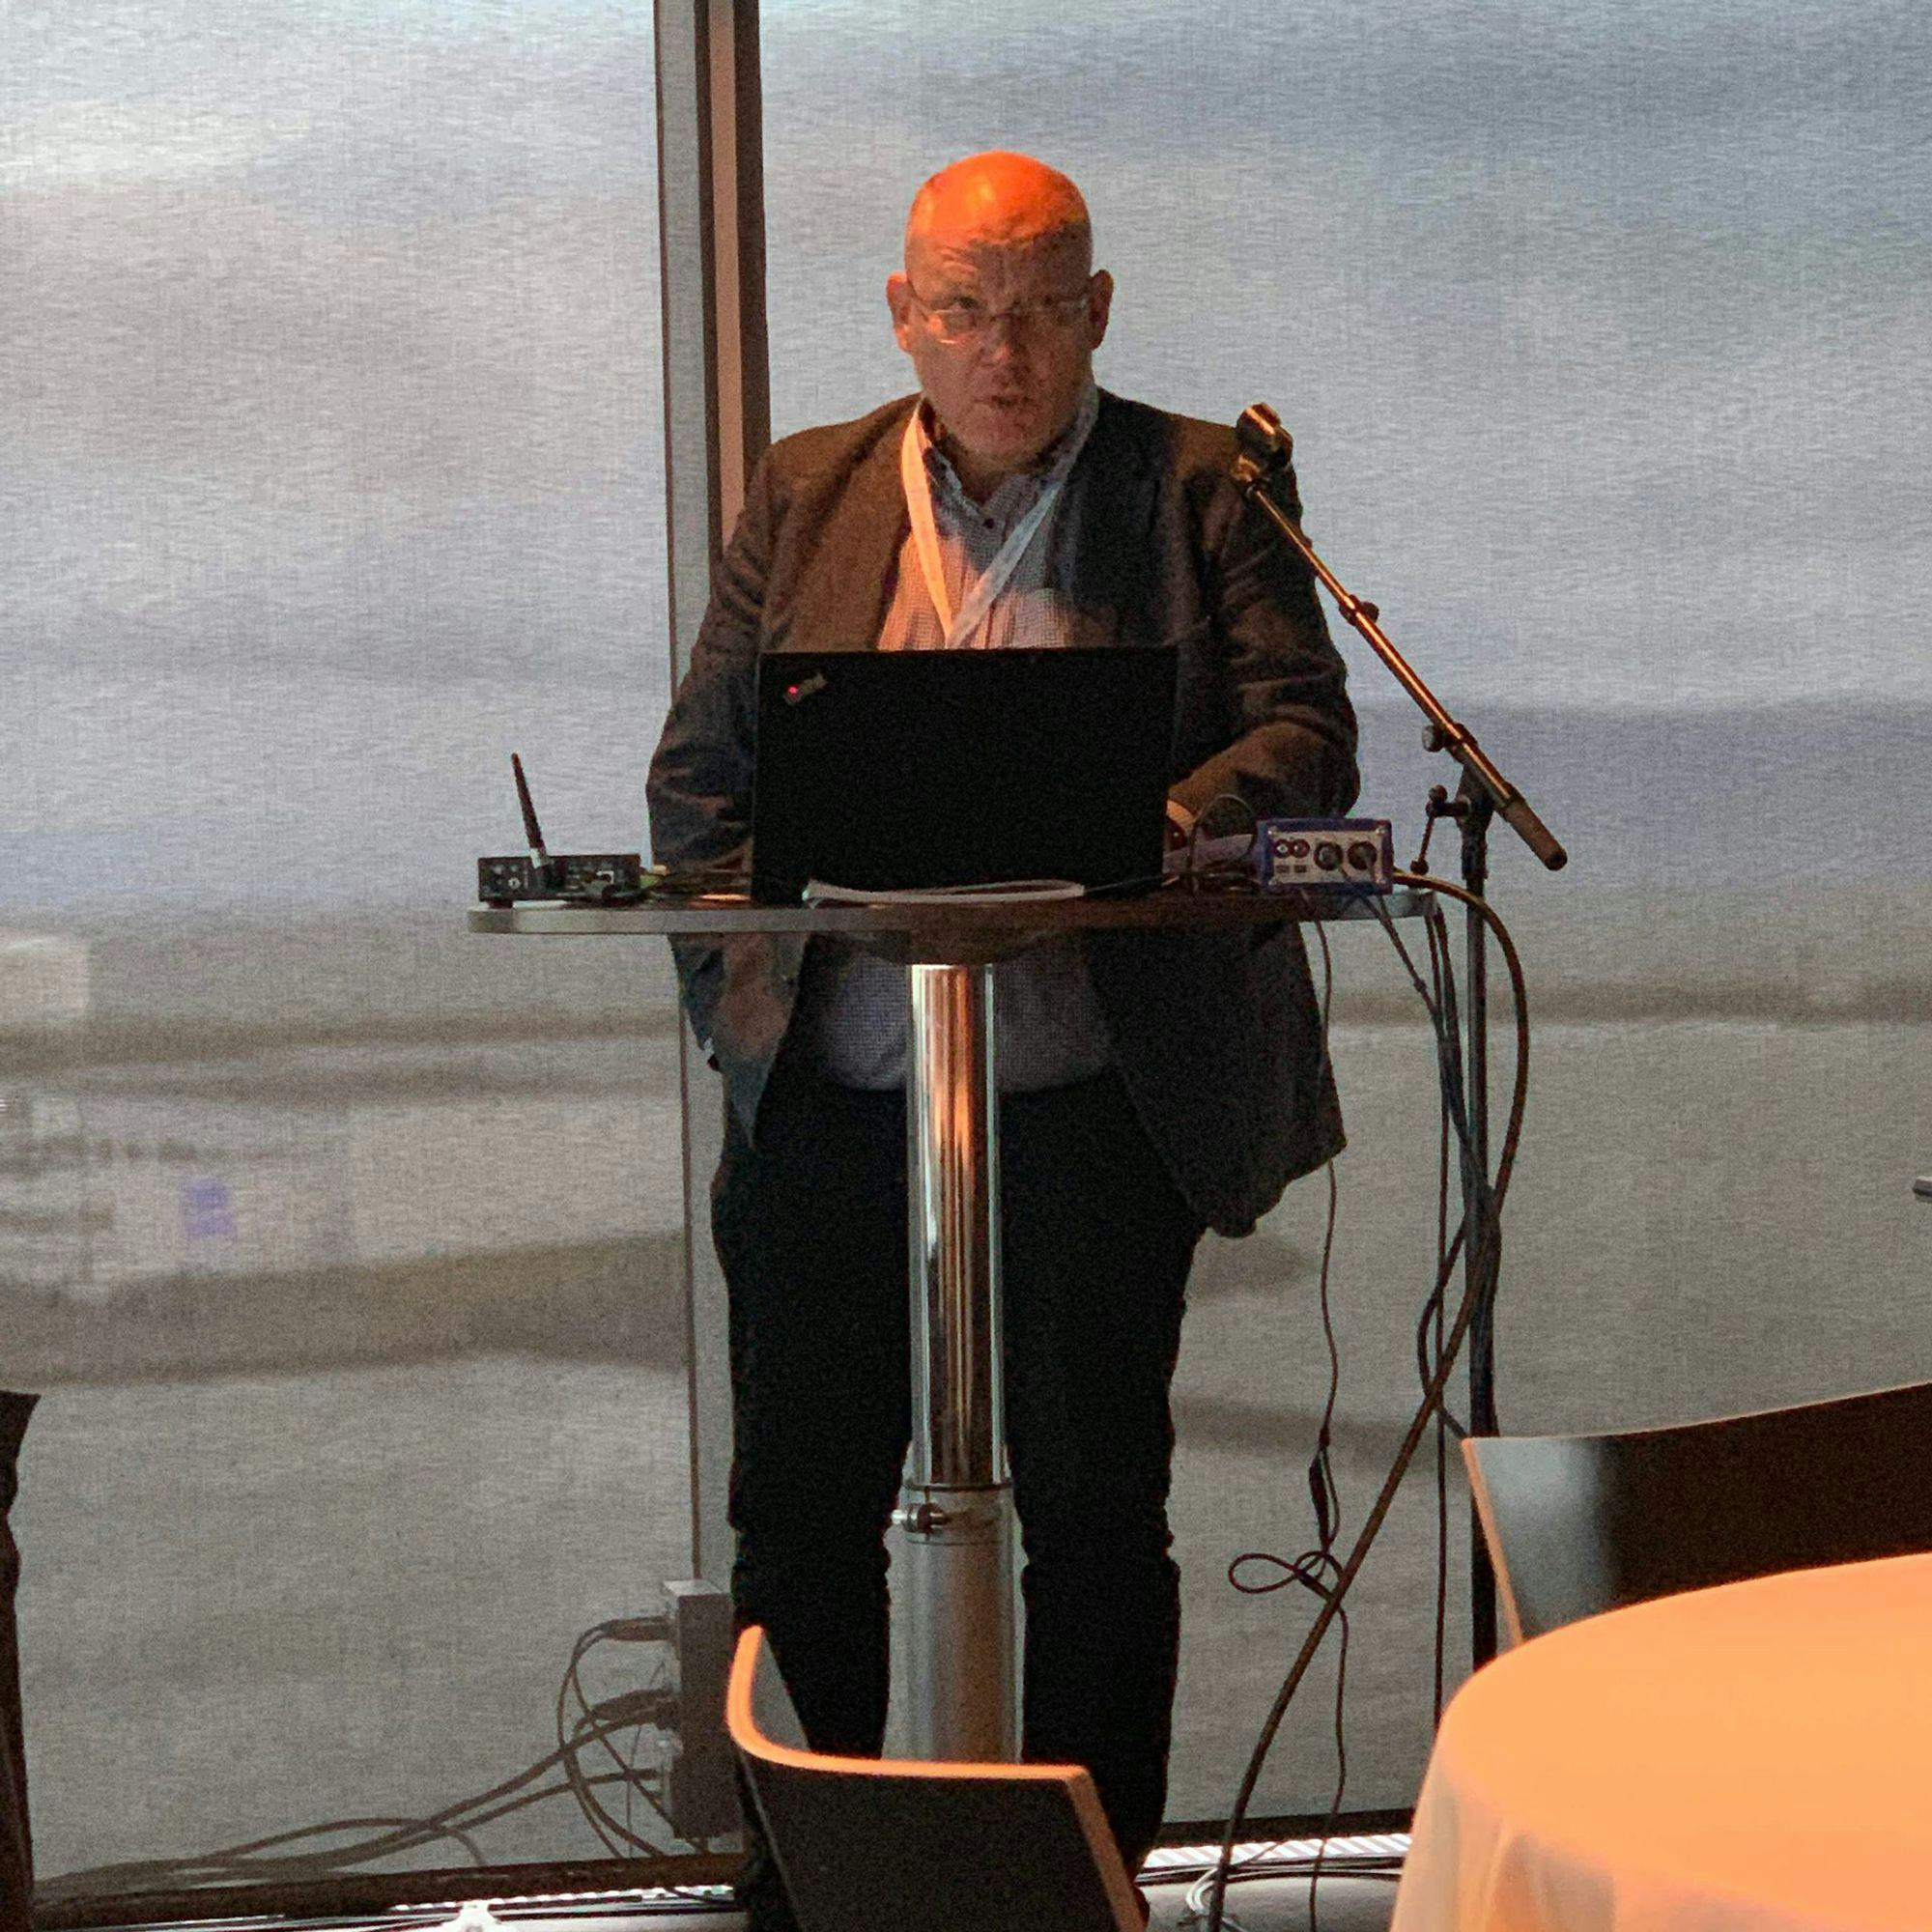 A man speaking into a microphone with a laptop and audio equipment set against a backdrop of large windows overlooking a lake